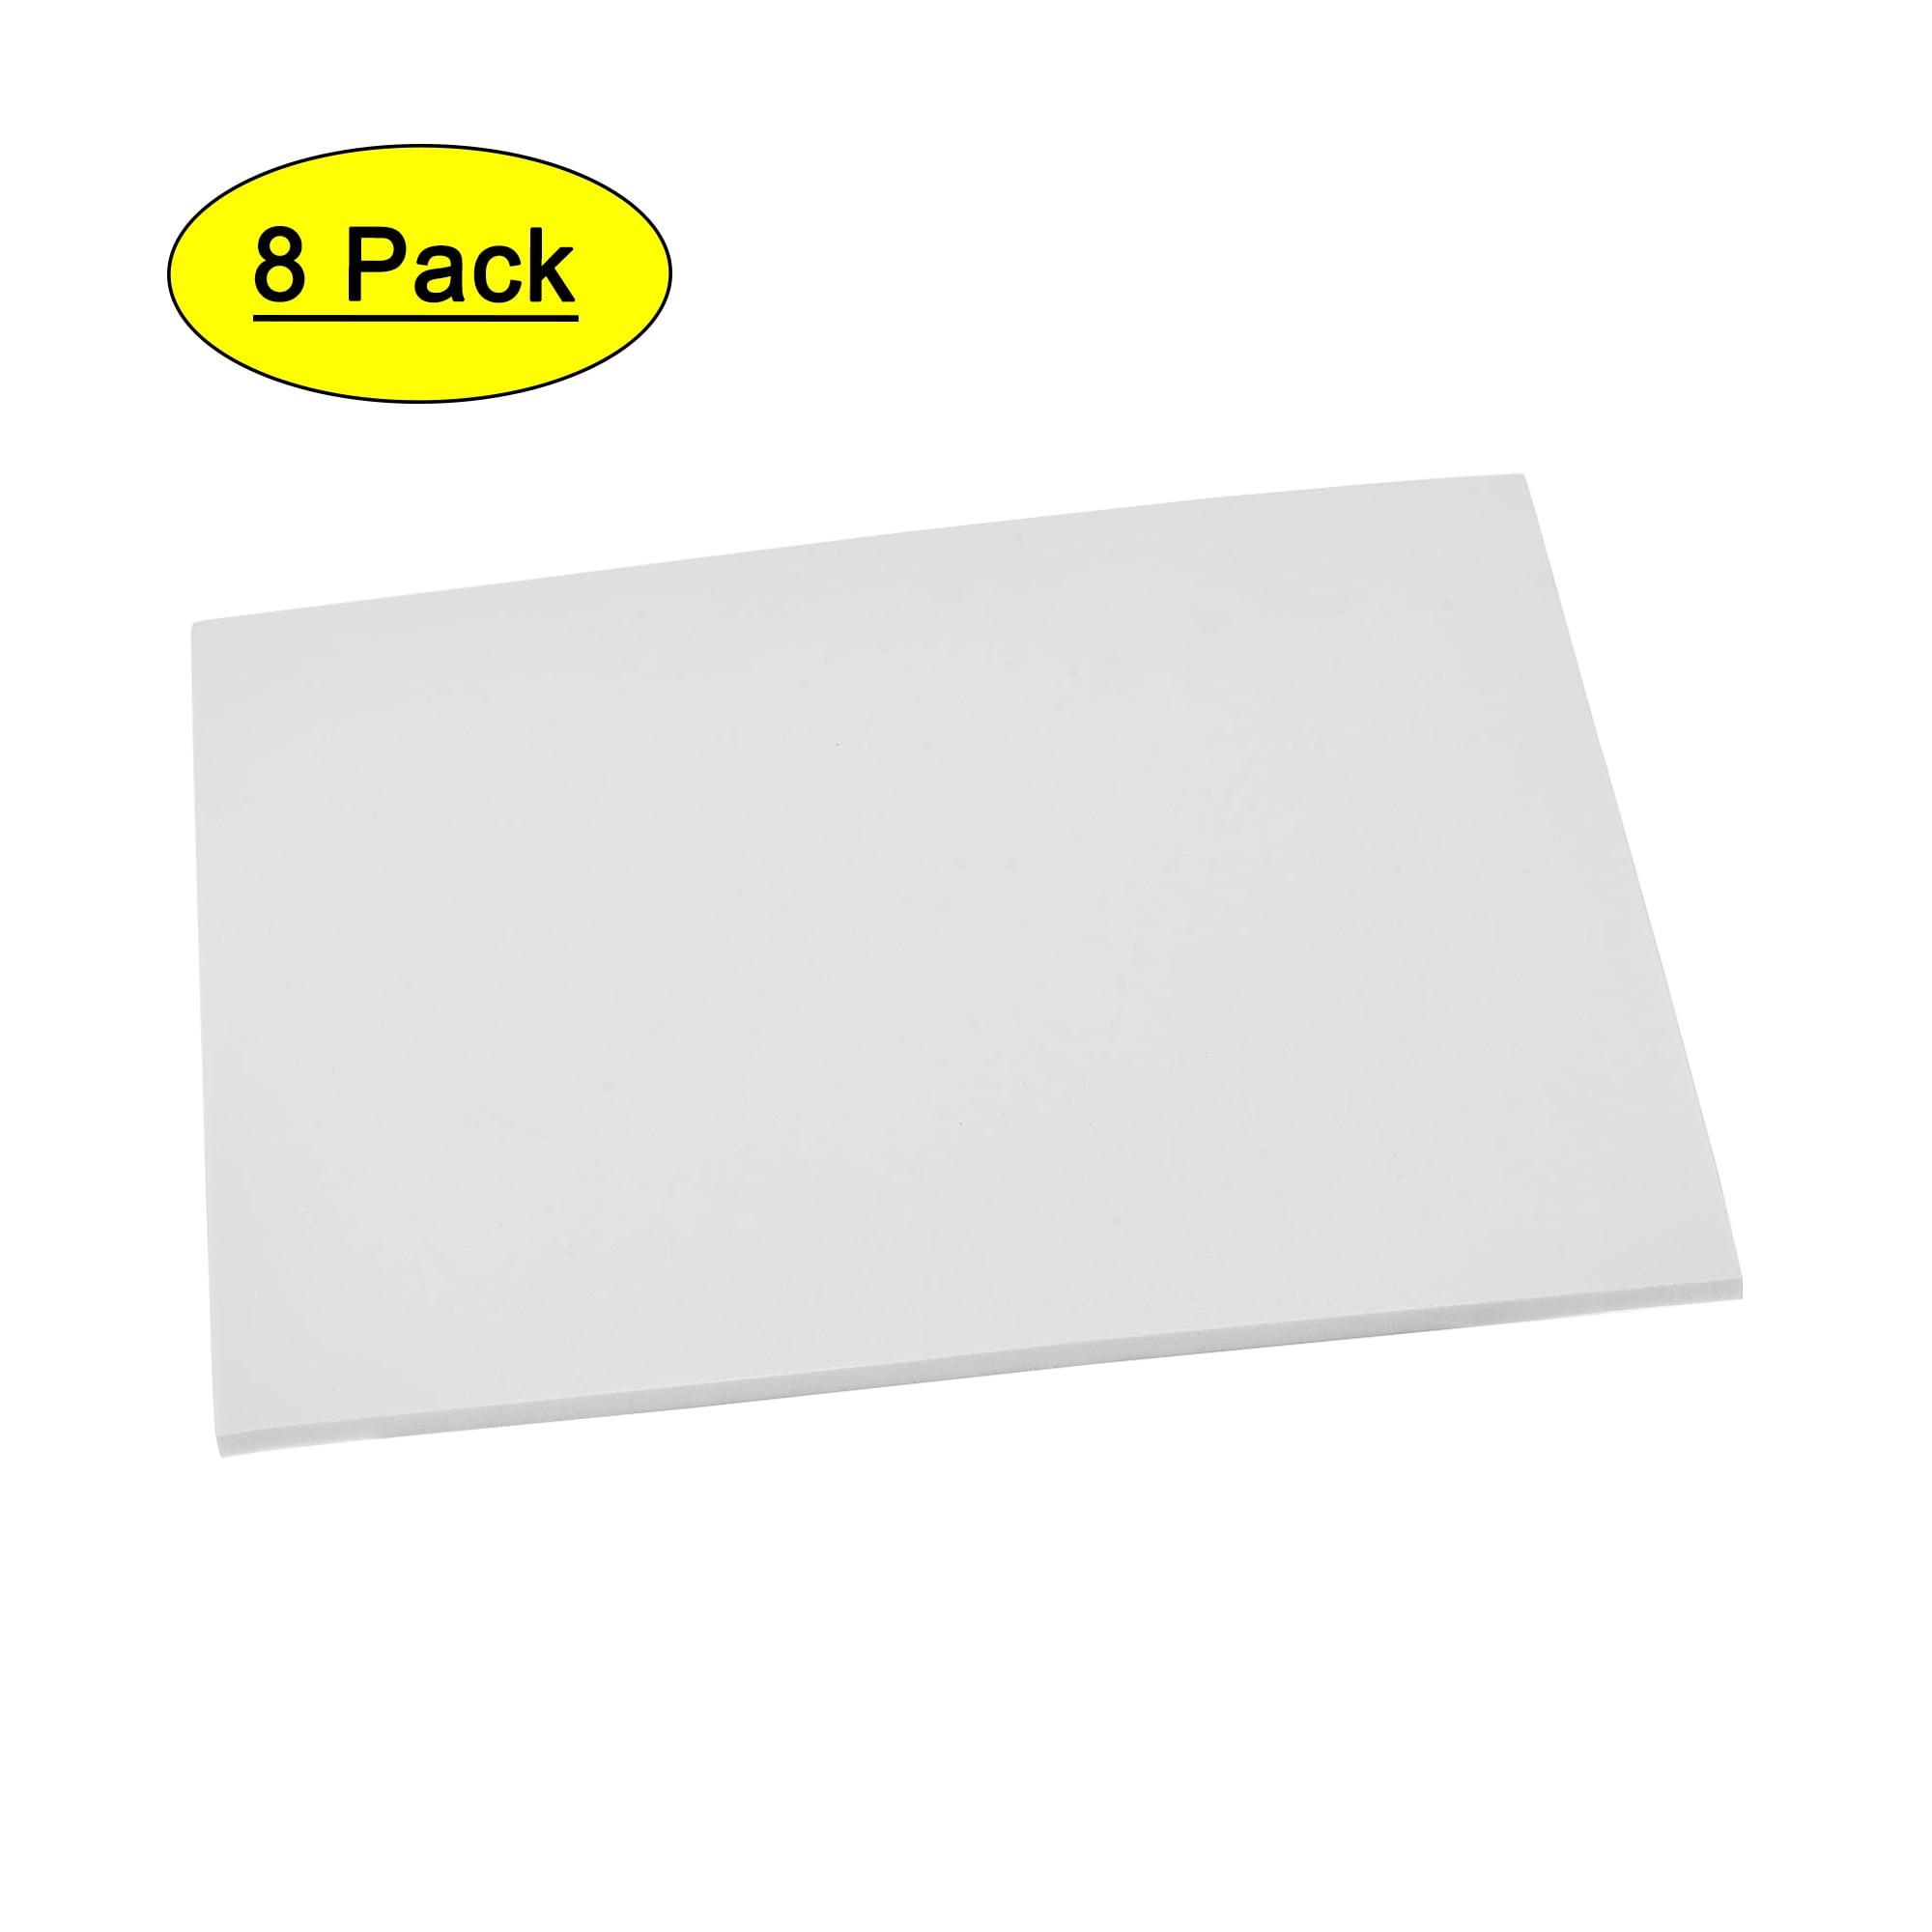 Polyethylene Foam Sheet - 4Pack Of Polyurethane Foam Pads for Packing and  Crafts, 16Inch X 12Inch X 1Inch Thickness